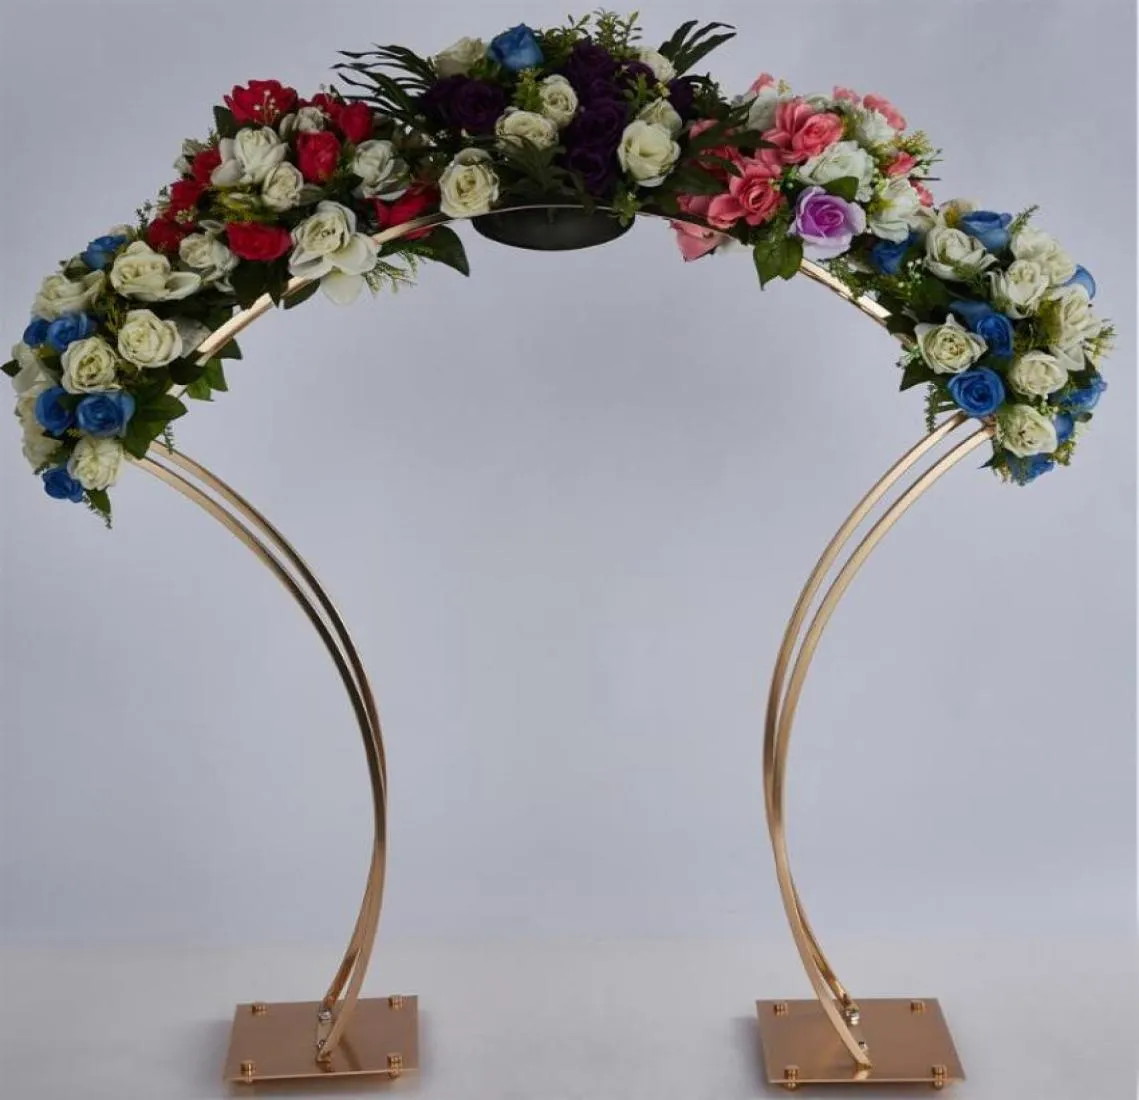 2st Wedding Arch Gold Backdrop Stand Metal Frame For Wedding Decoration 38 Inch Tall Flower Stand Large Centerpiece Table Decor1209443